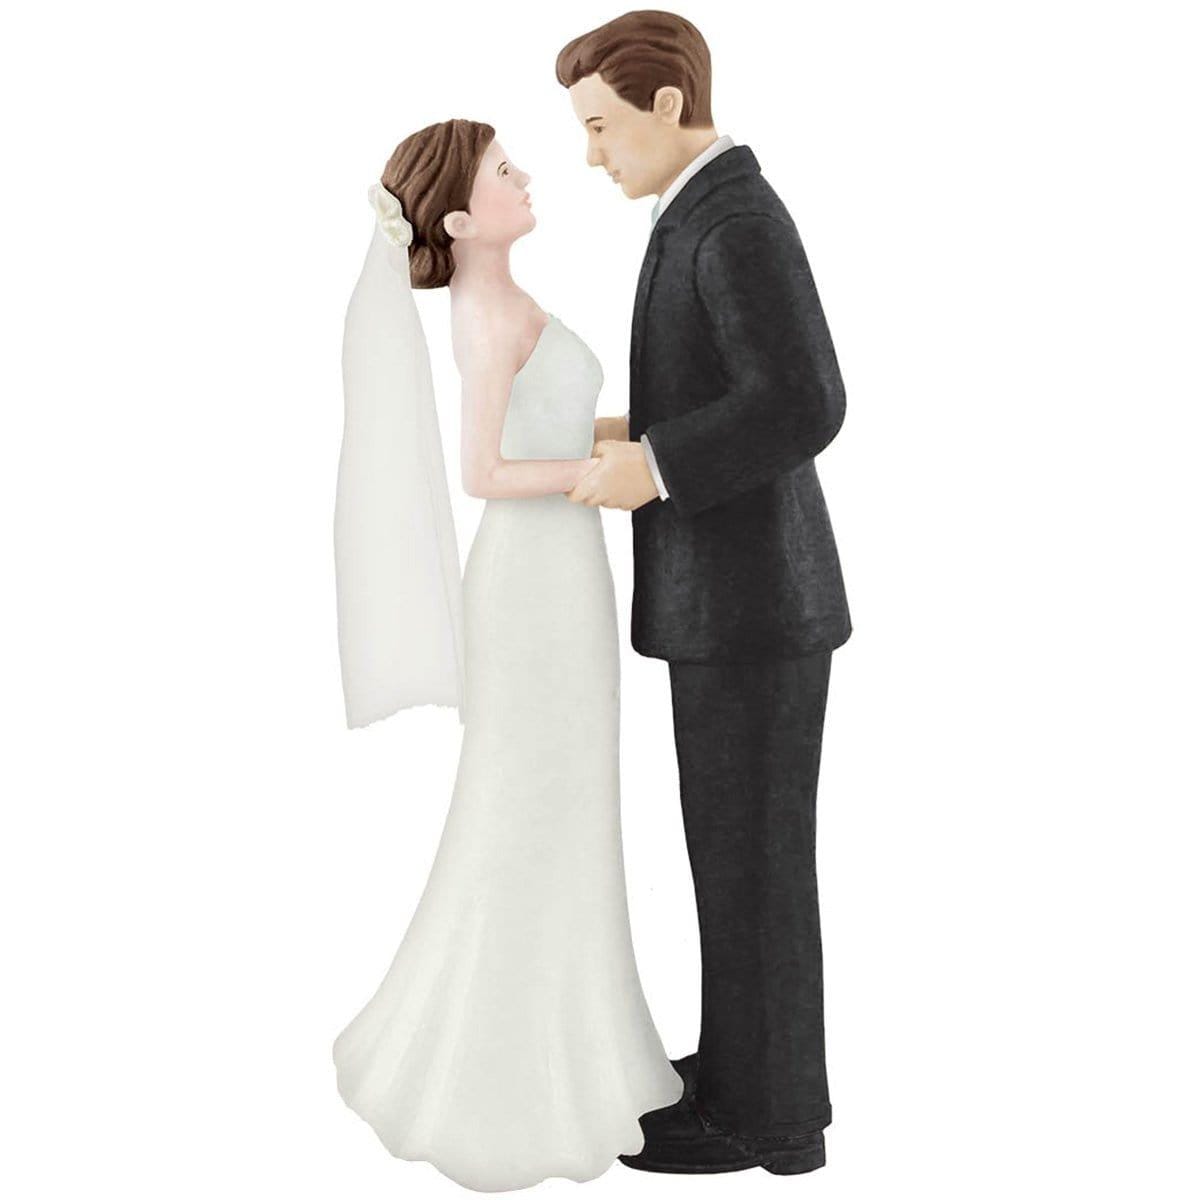 Buy Wedding Cake Topper - Bride & Groom 4.5 in. sold at Party Expert